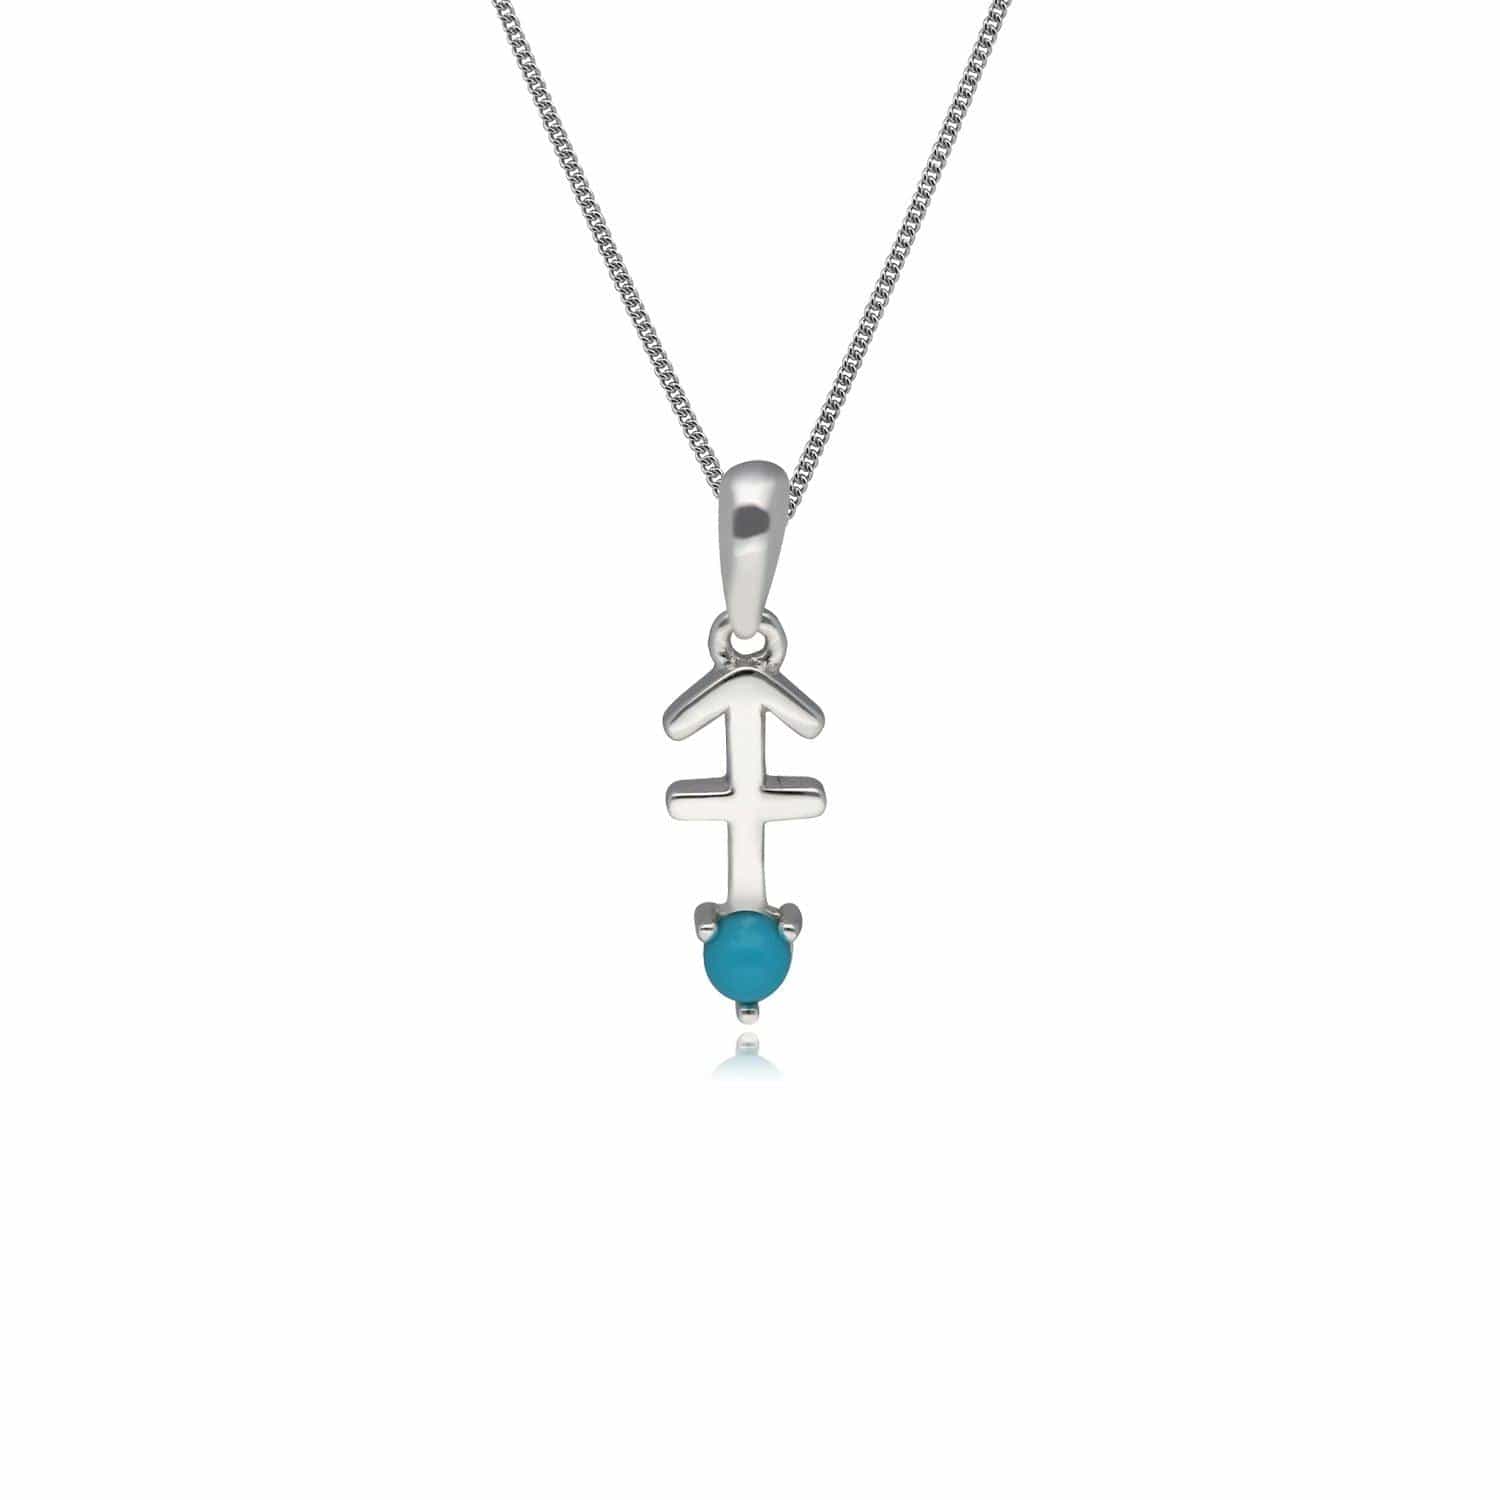 162P0242019 Turquoise Sagittarius Zodiac Charm Necklace in 9ct White Gold 1